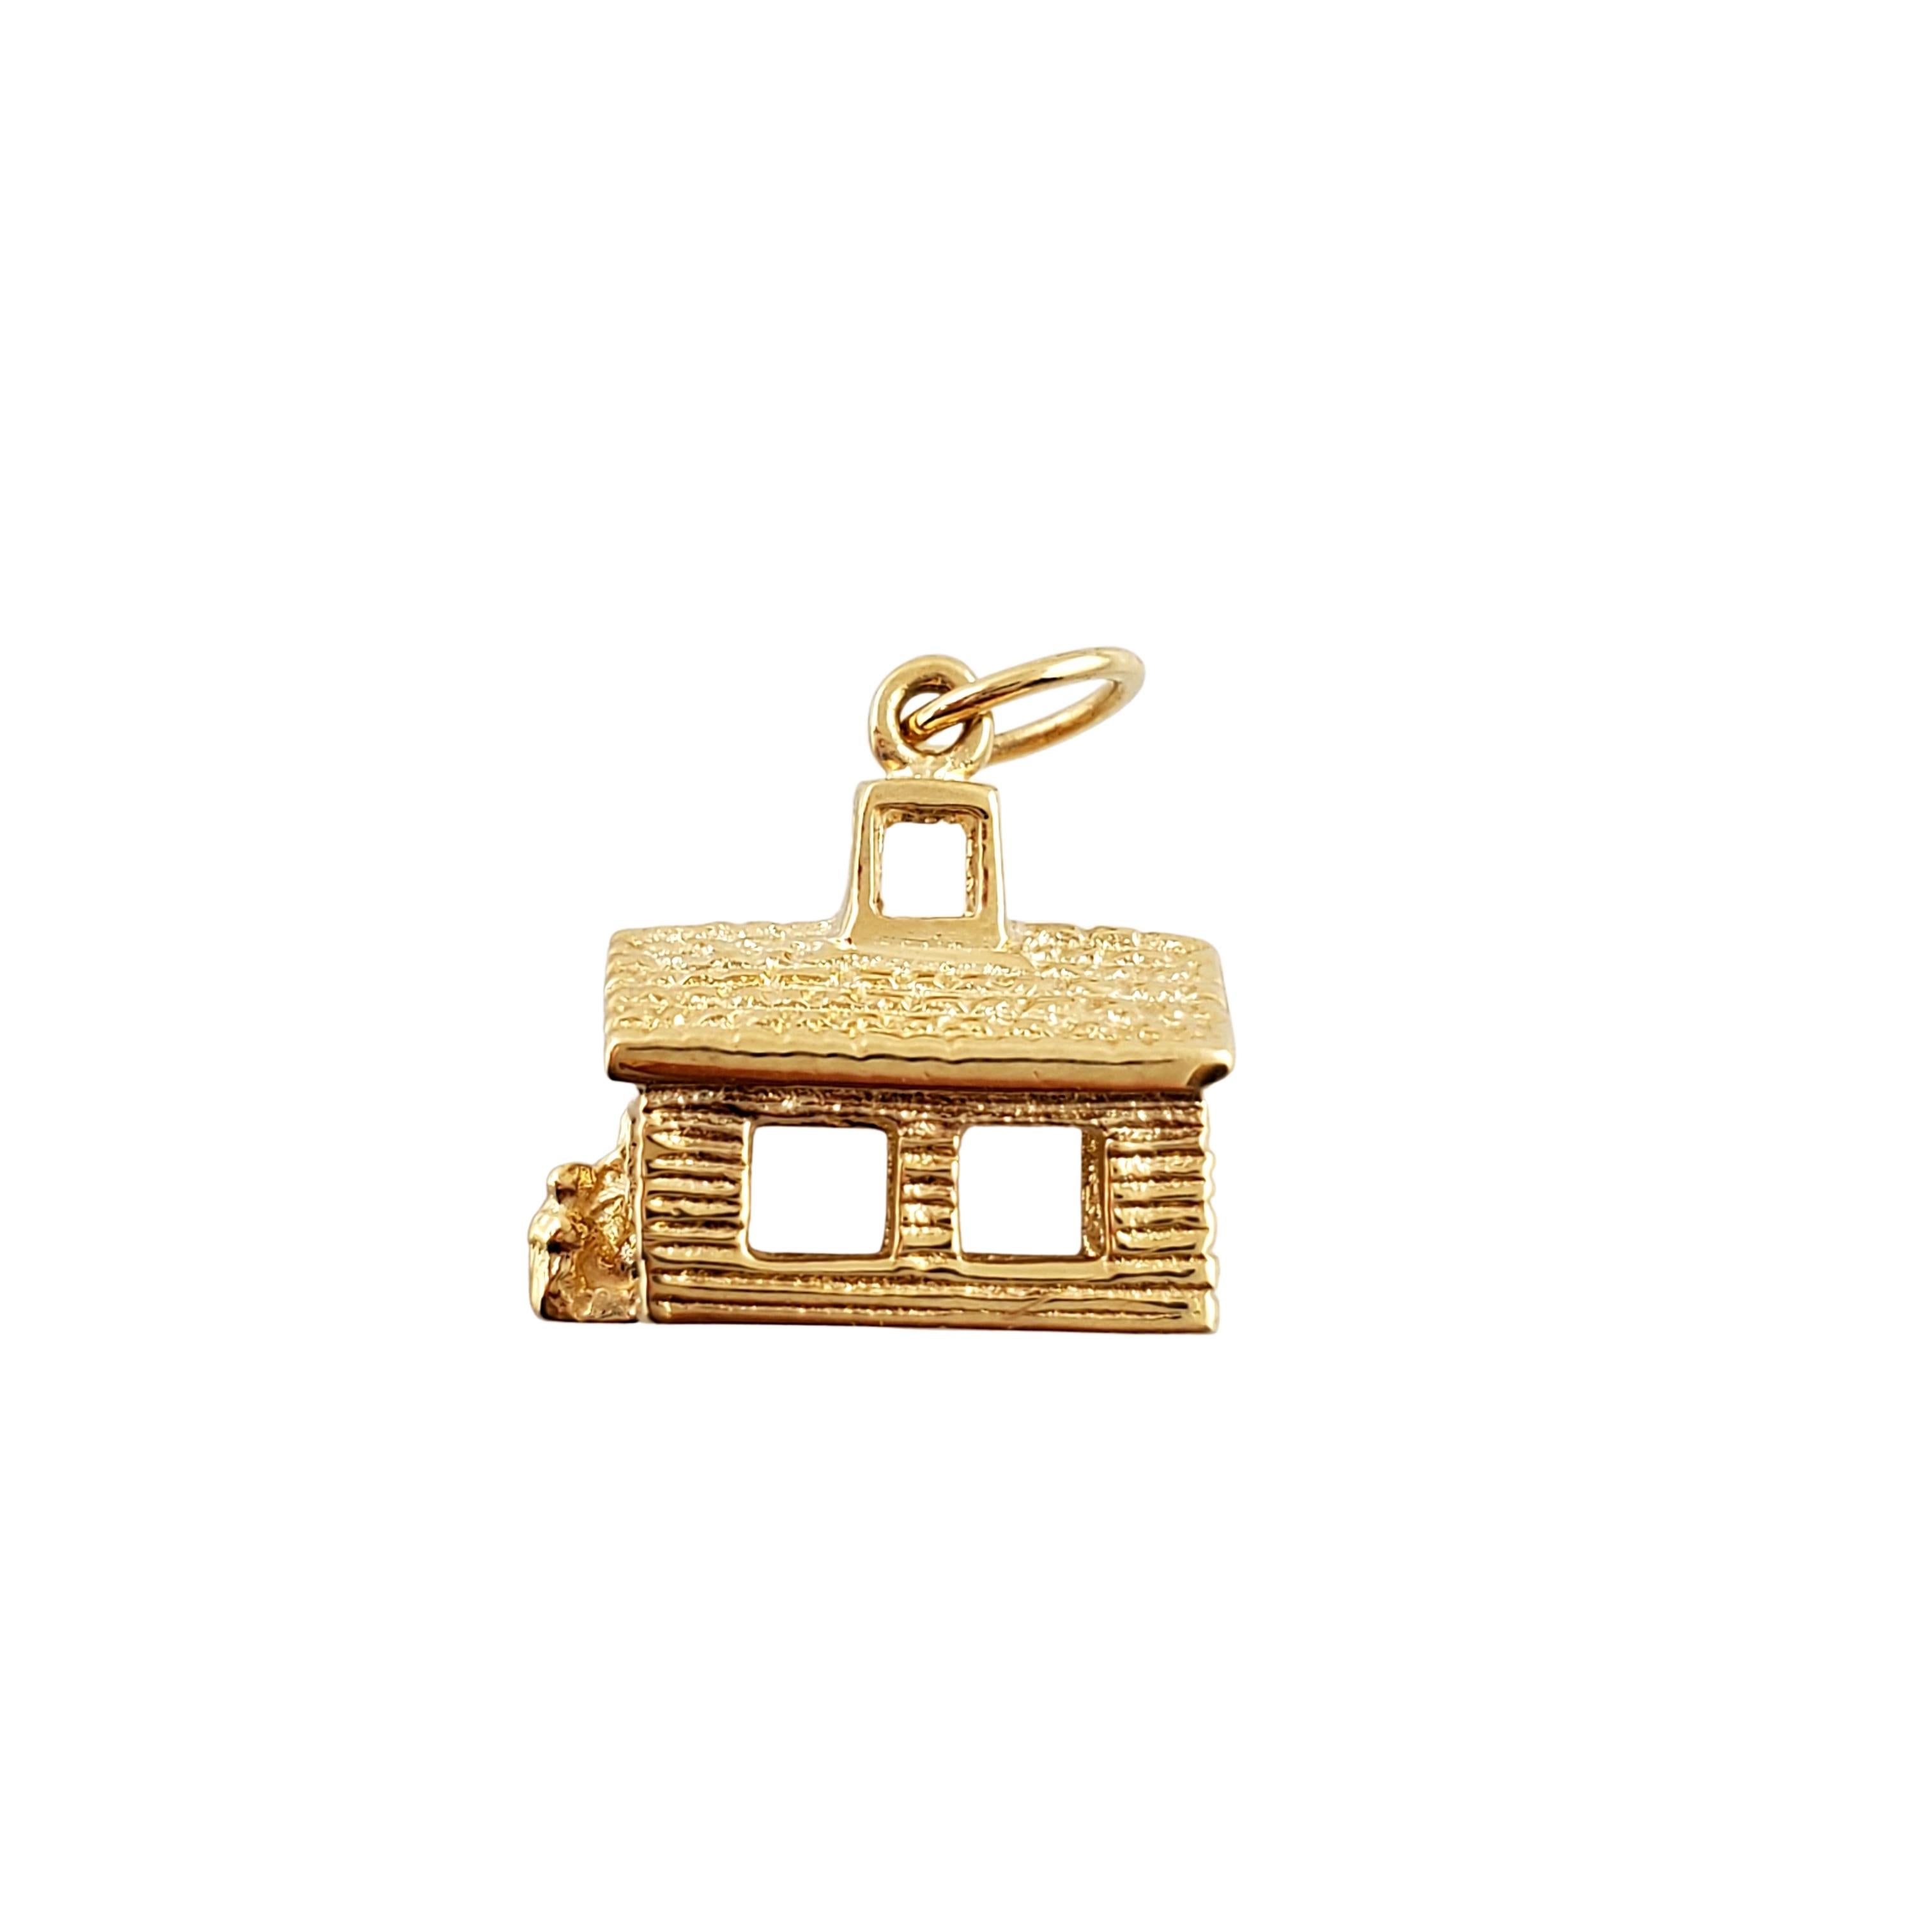 10K Yellow Gold House Charm

Beautiful 14K yellow gold house charm is hollow with small details such as open windows and brick carvings to really give this charm a life like feel and also features a women and child standing in front.

Size: 13.5mm X